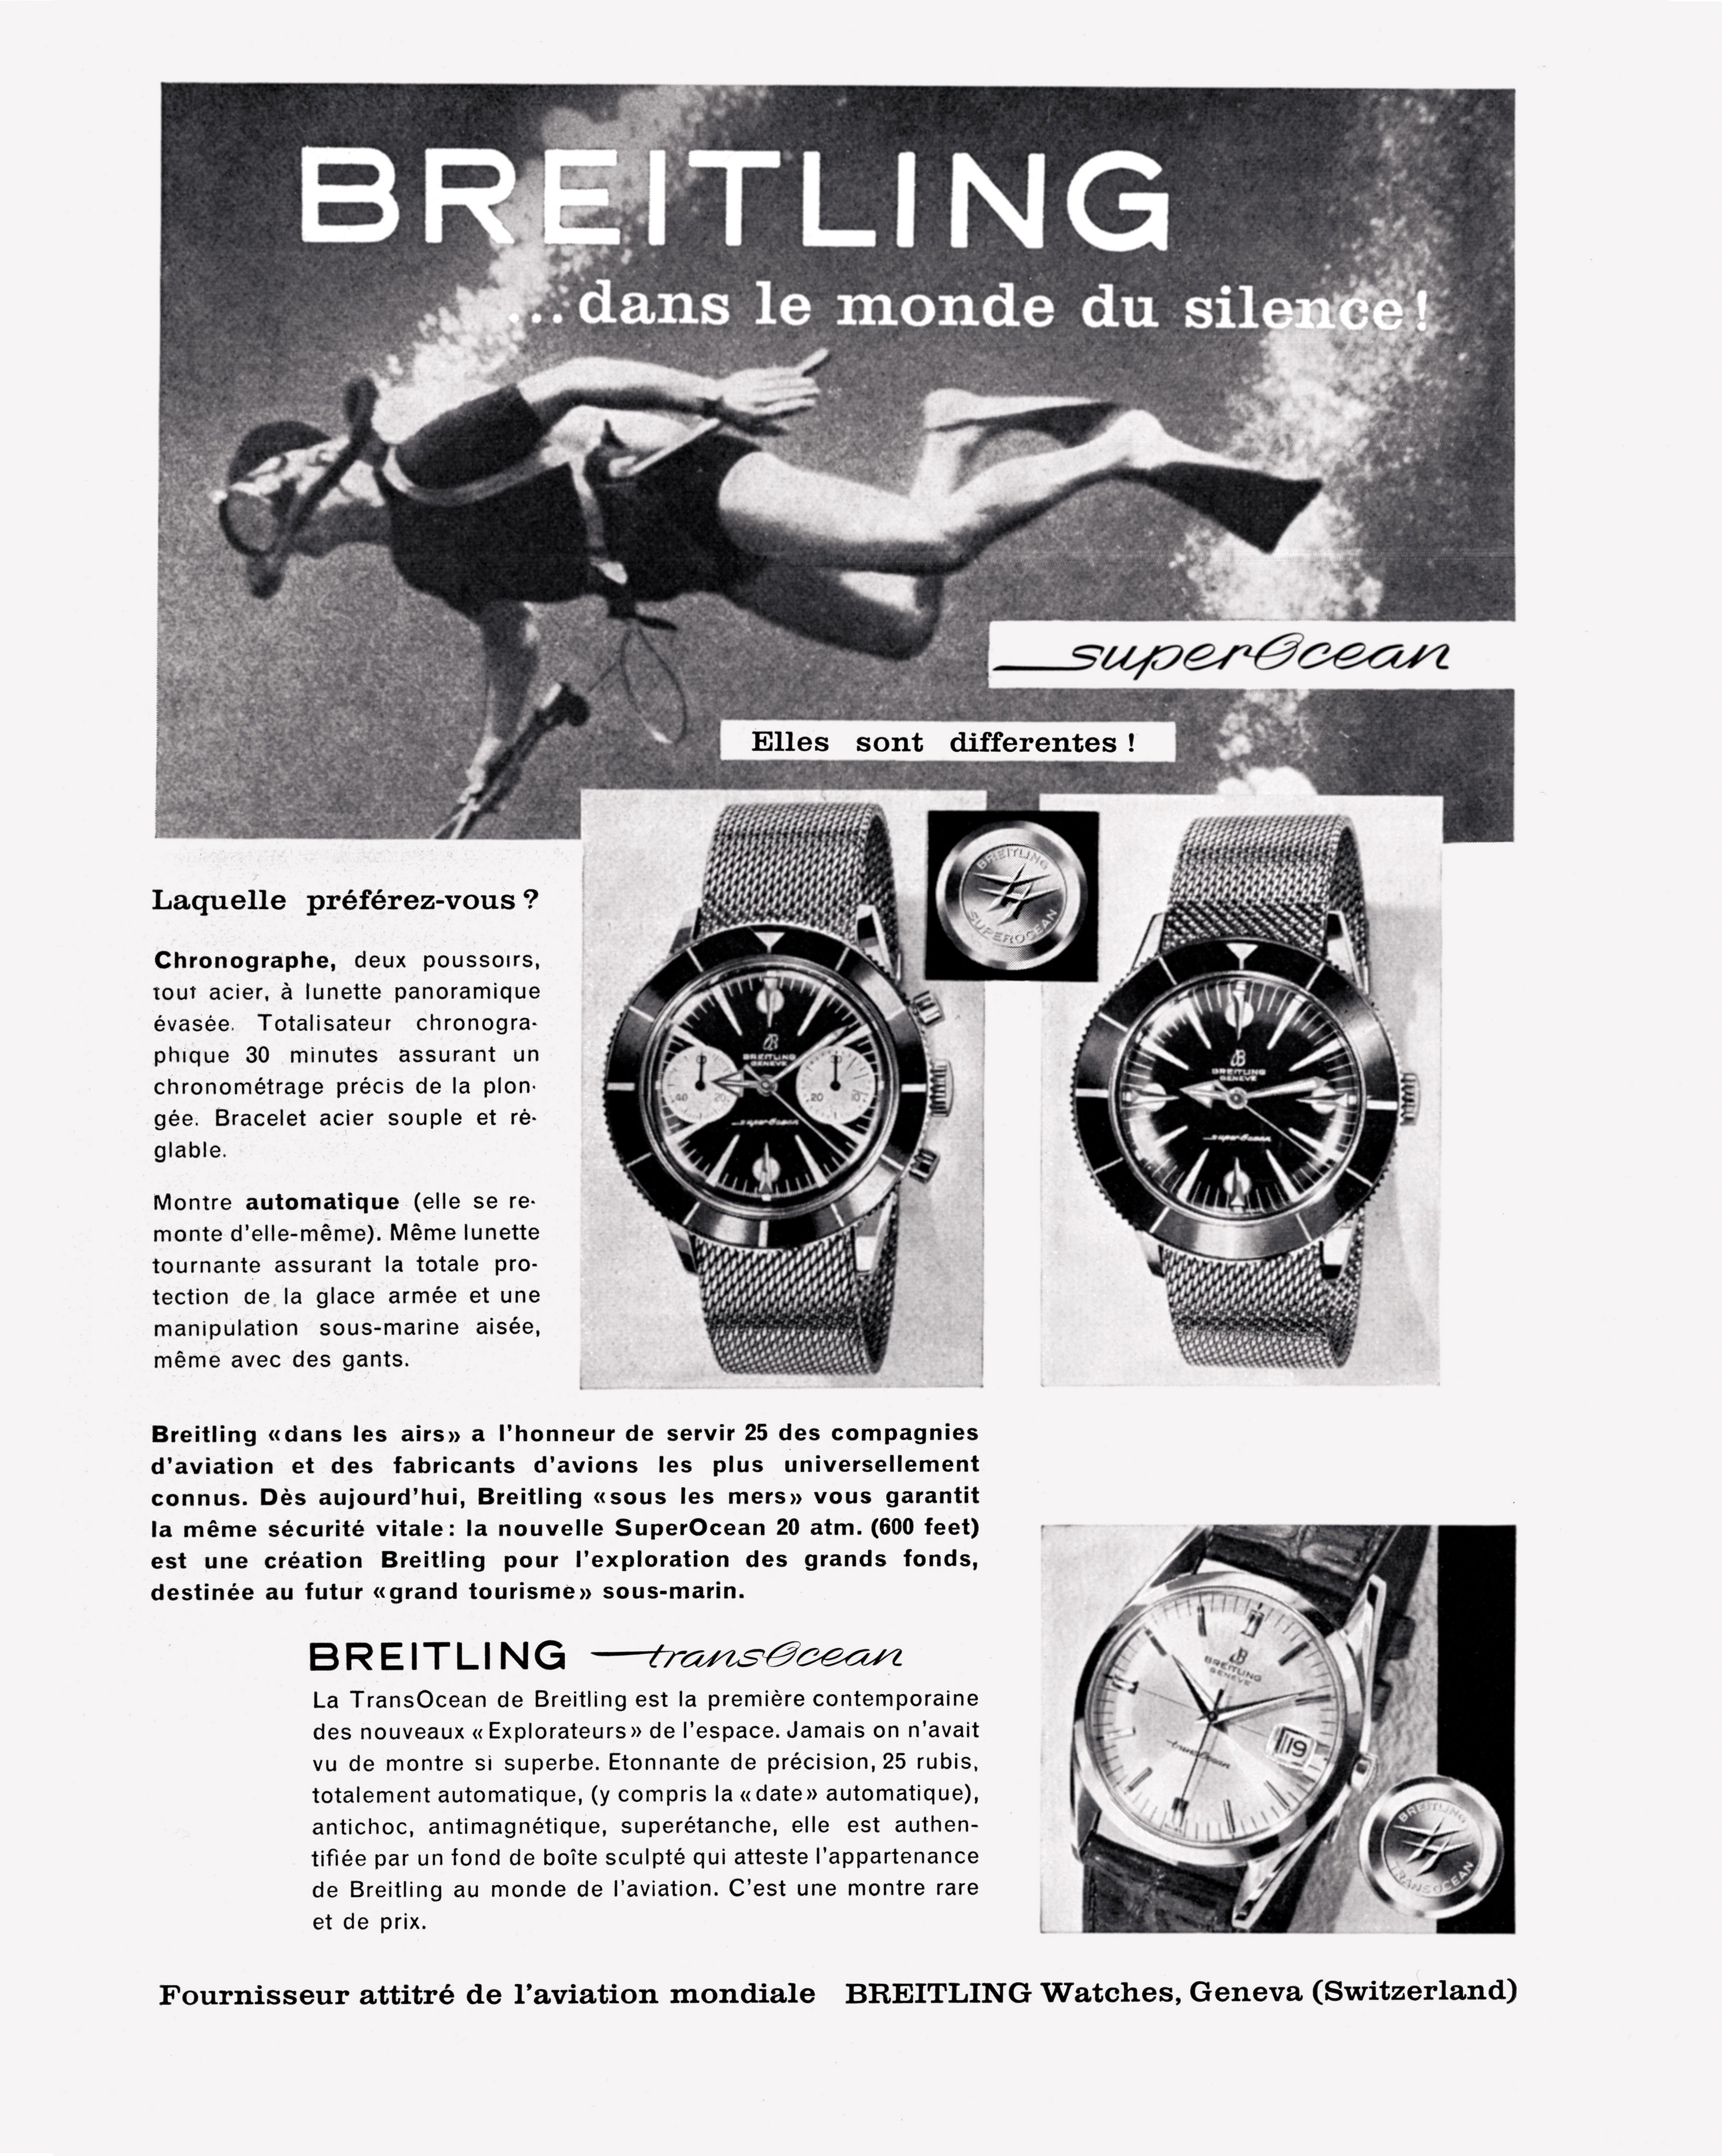 All titles are courtesy Rizzoli International Publications, ©2019 Sea Time by Aaron Sigmond and Mark Bernardo, Rizzoli New York, Vintage advertisement, ©Breitling SA.